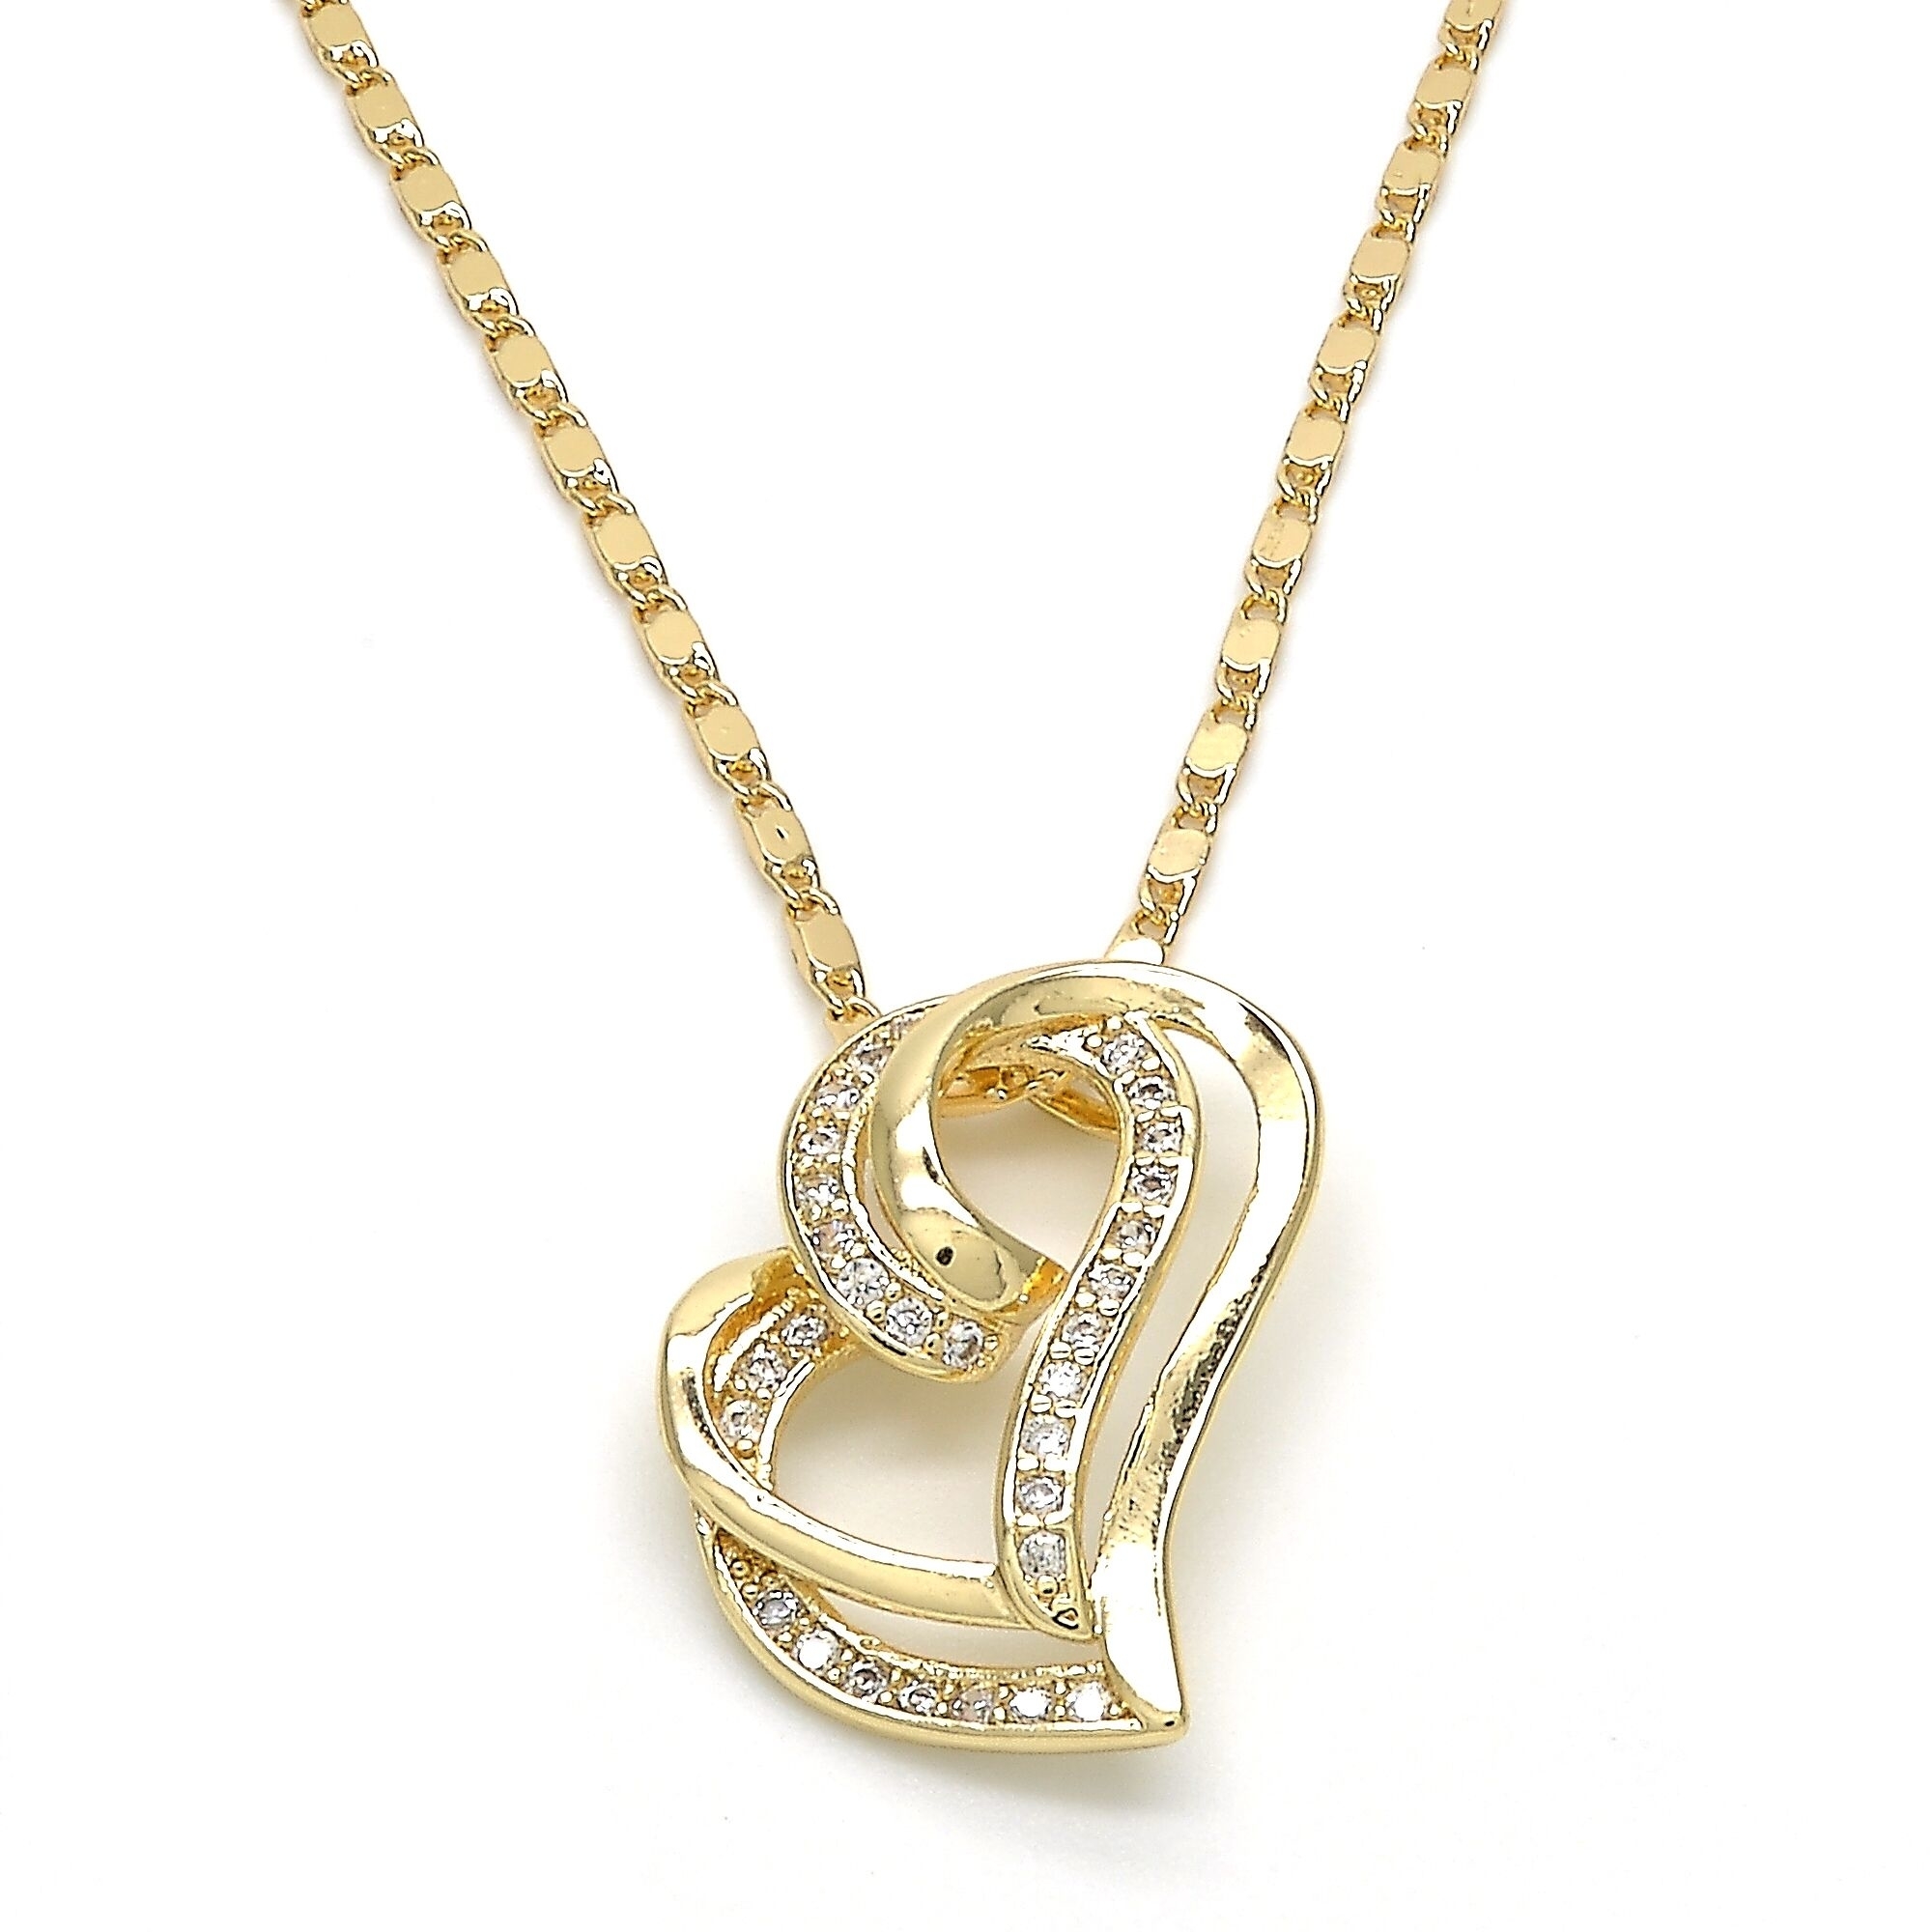 Gold Filled Fancy Necklace, Heart Design, With White Micro Pave, Polished Finish, Golden Tone